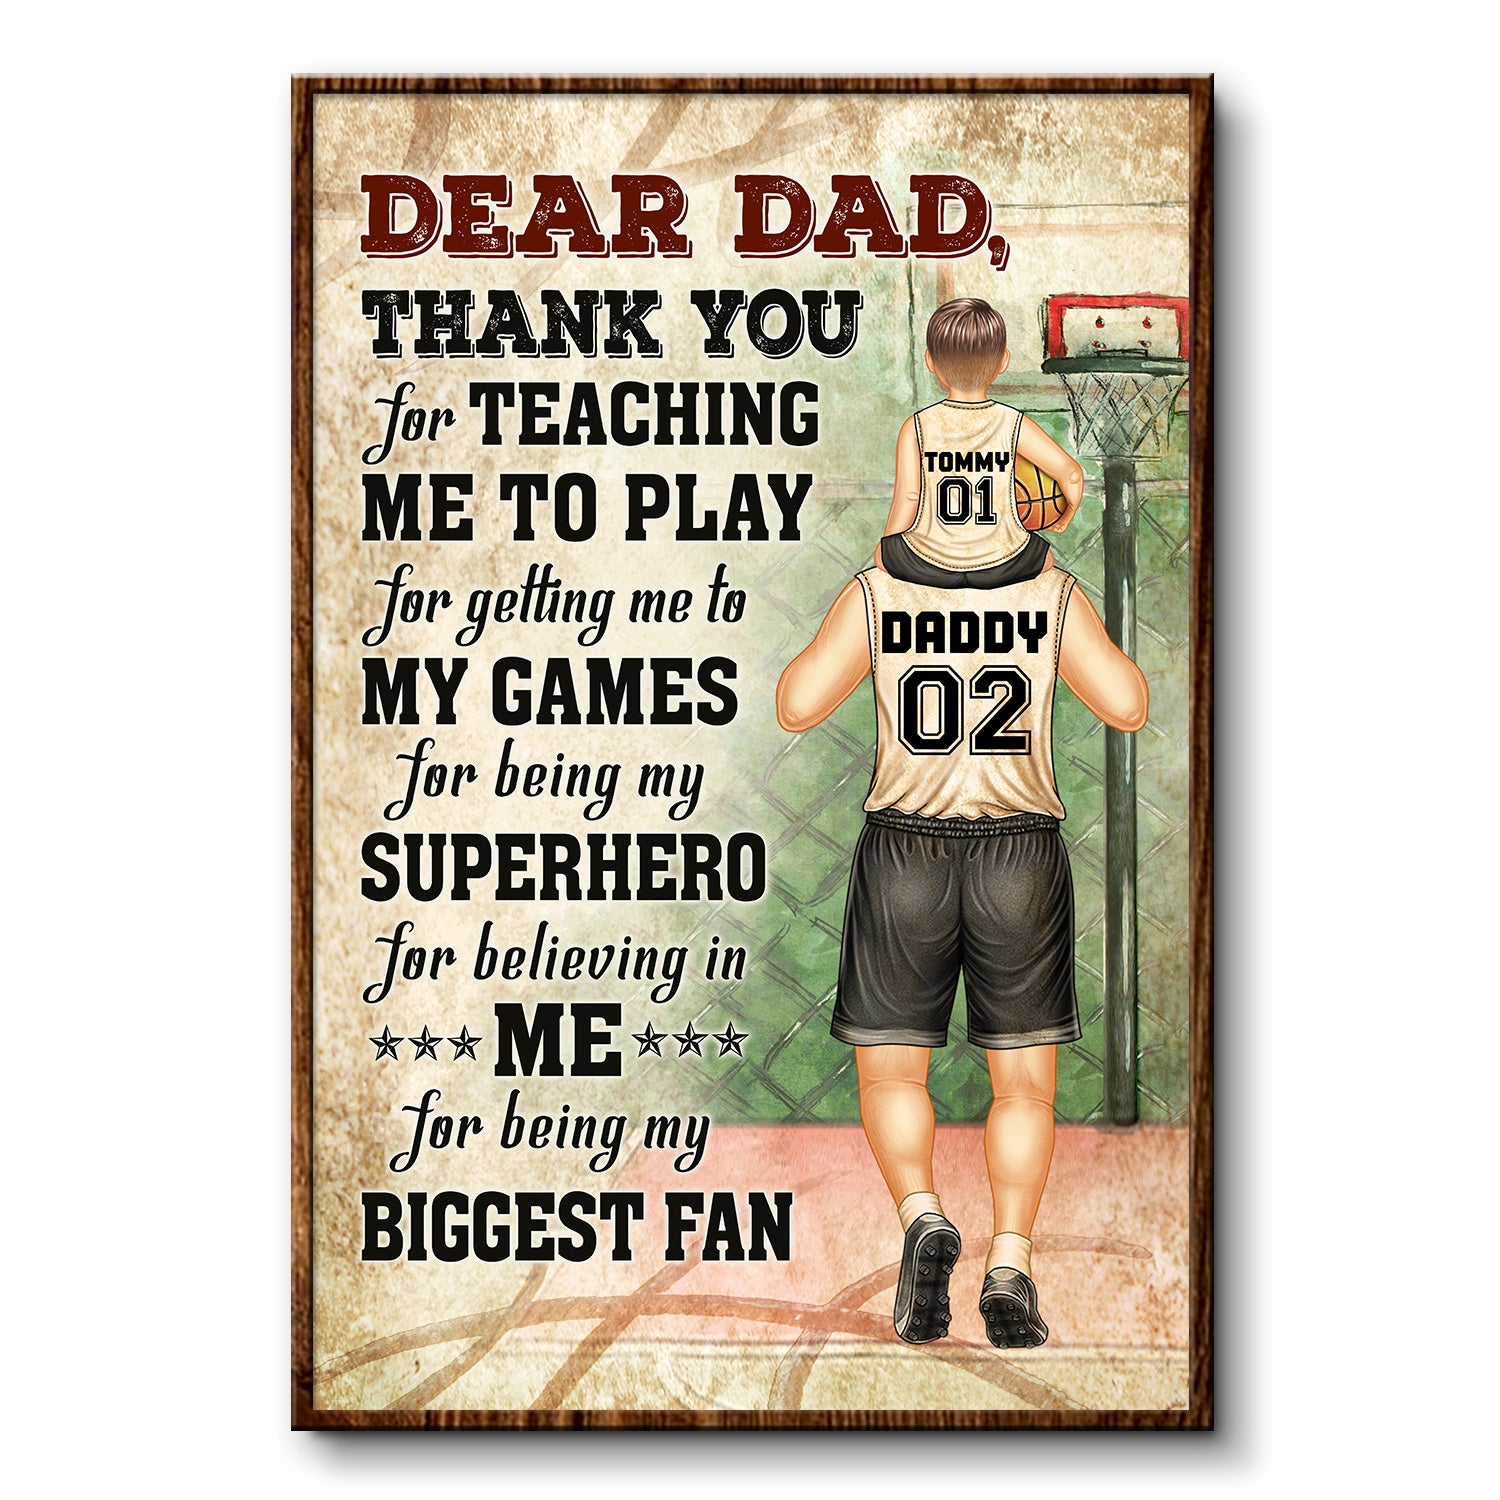 Dear Dad Thank You For Teaching Me - Gift For Basketball Fans, Father, Grandpa - Personalized Custom Poster